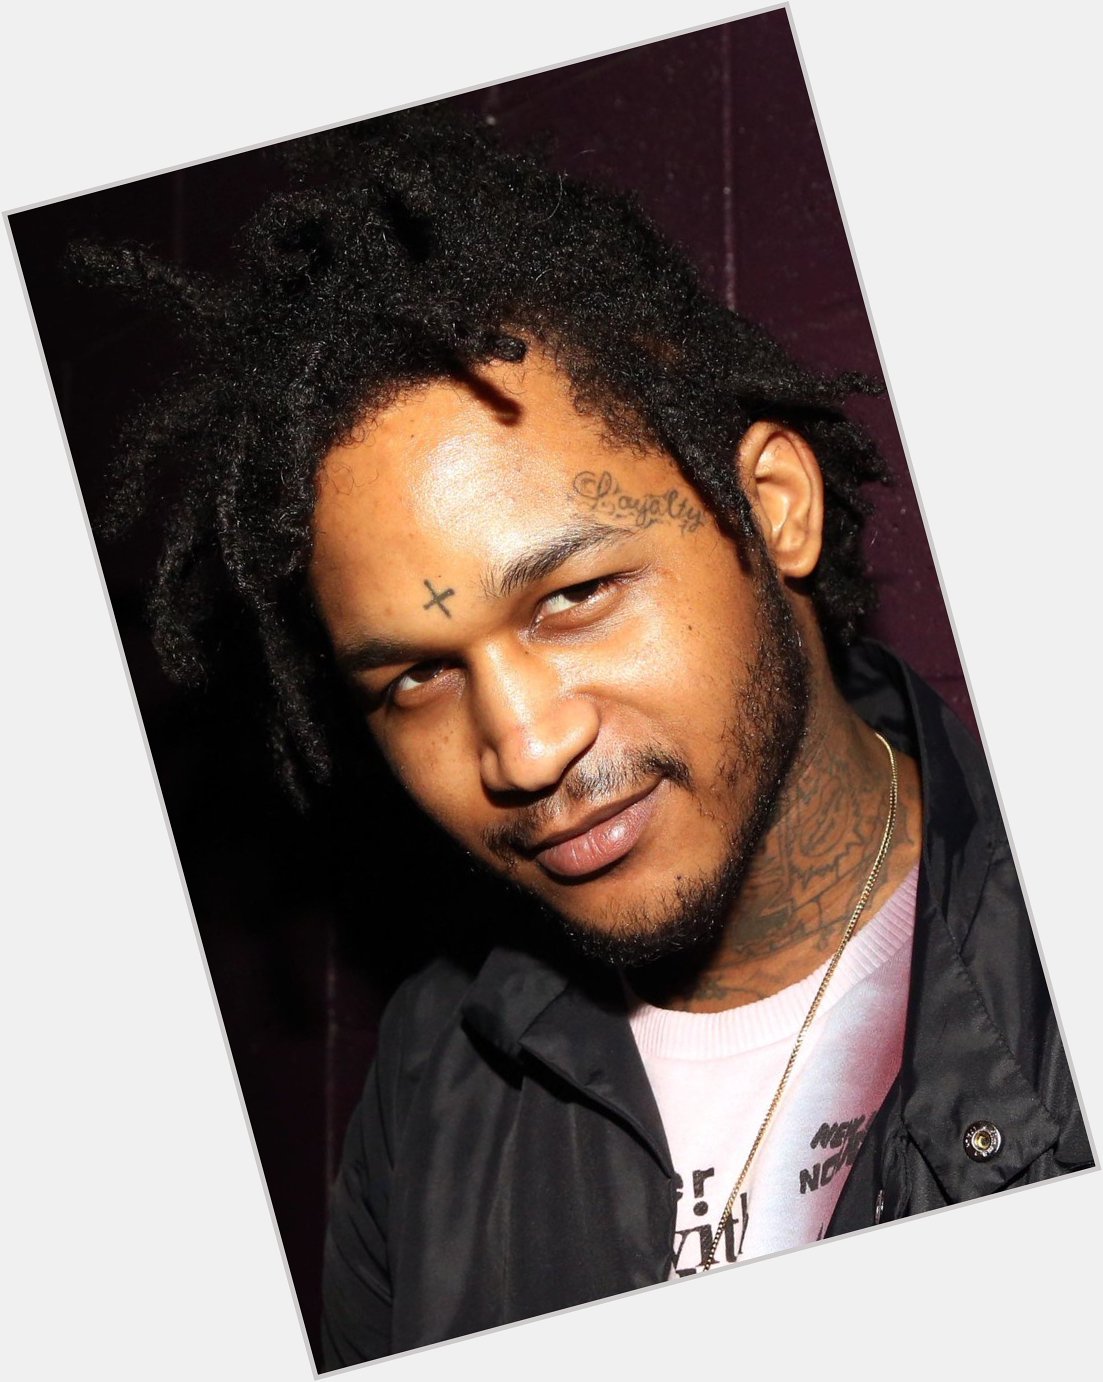 Happy birthday Fredo Santana he would have been 31 years old today 